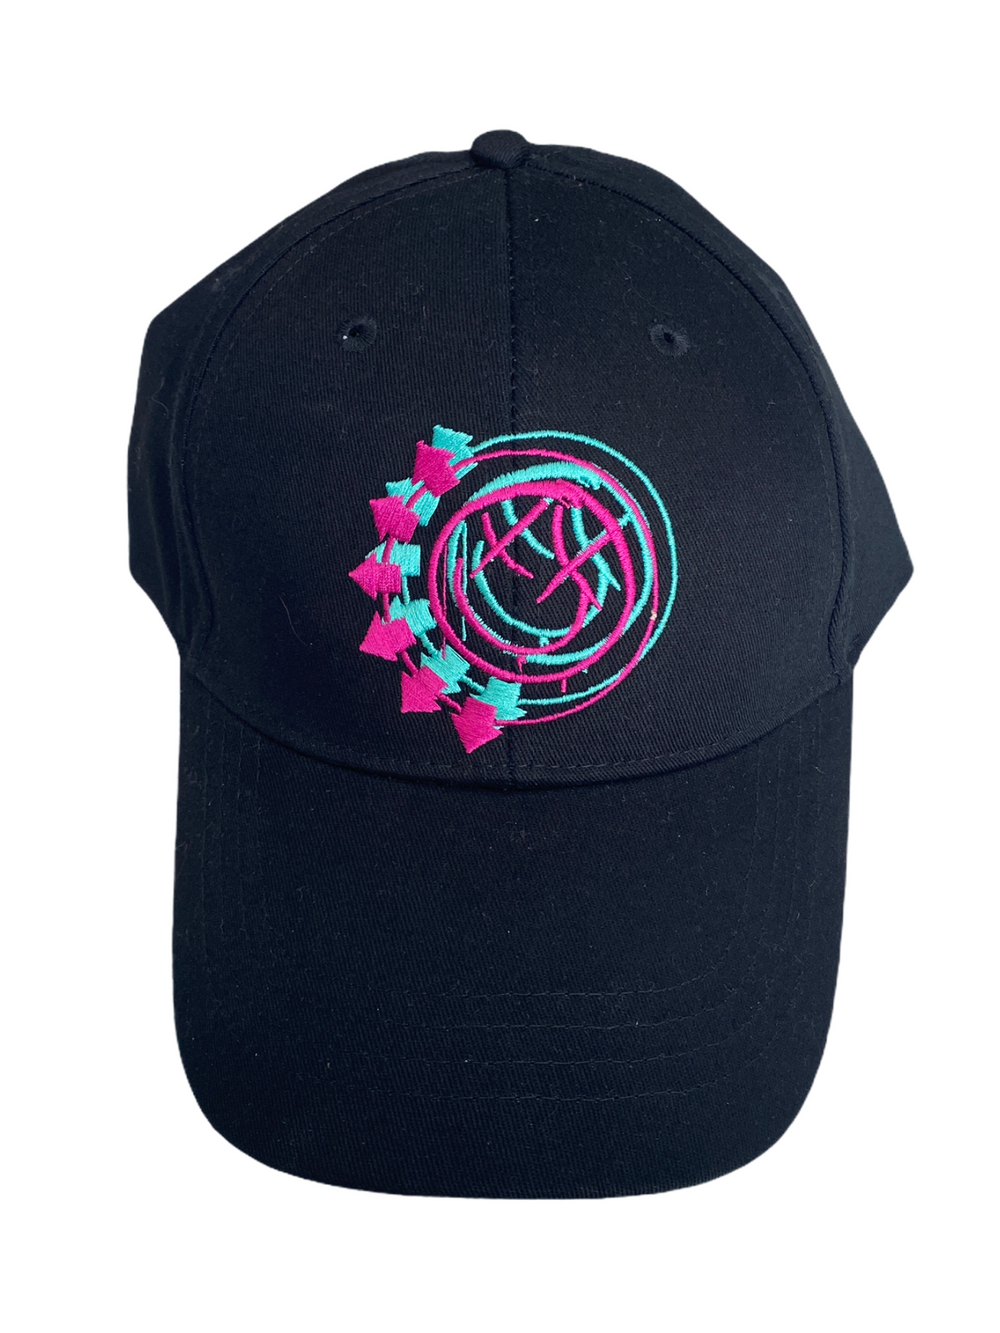 Blink 182 Official Embroidered Peak Cap Adjustable Brand New Double Six Arrows